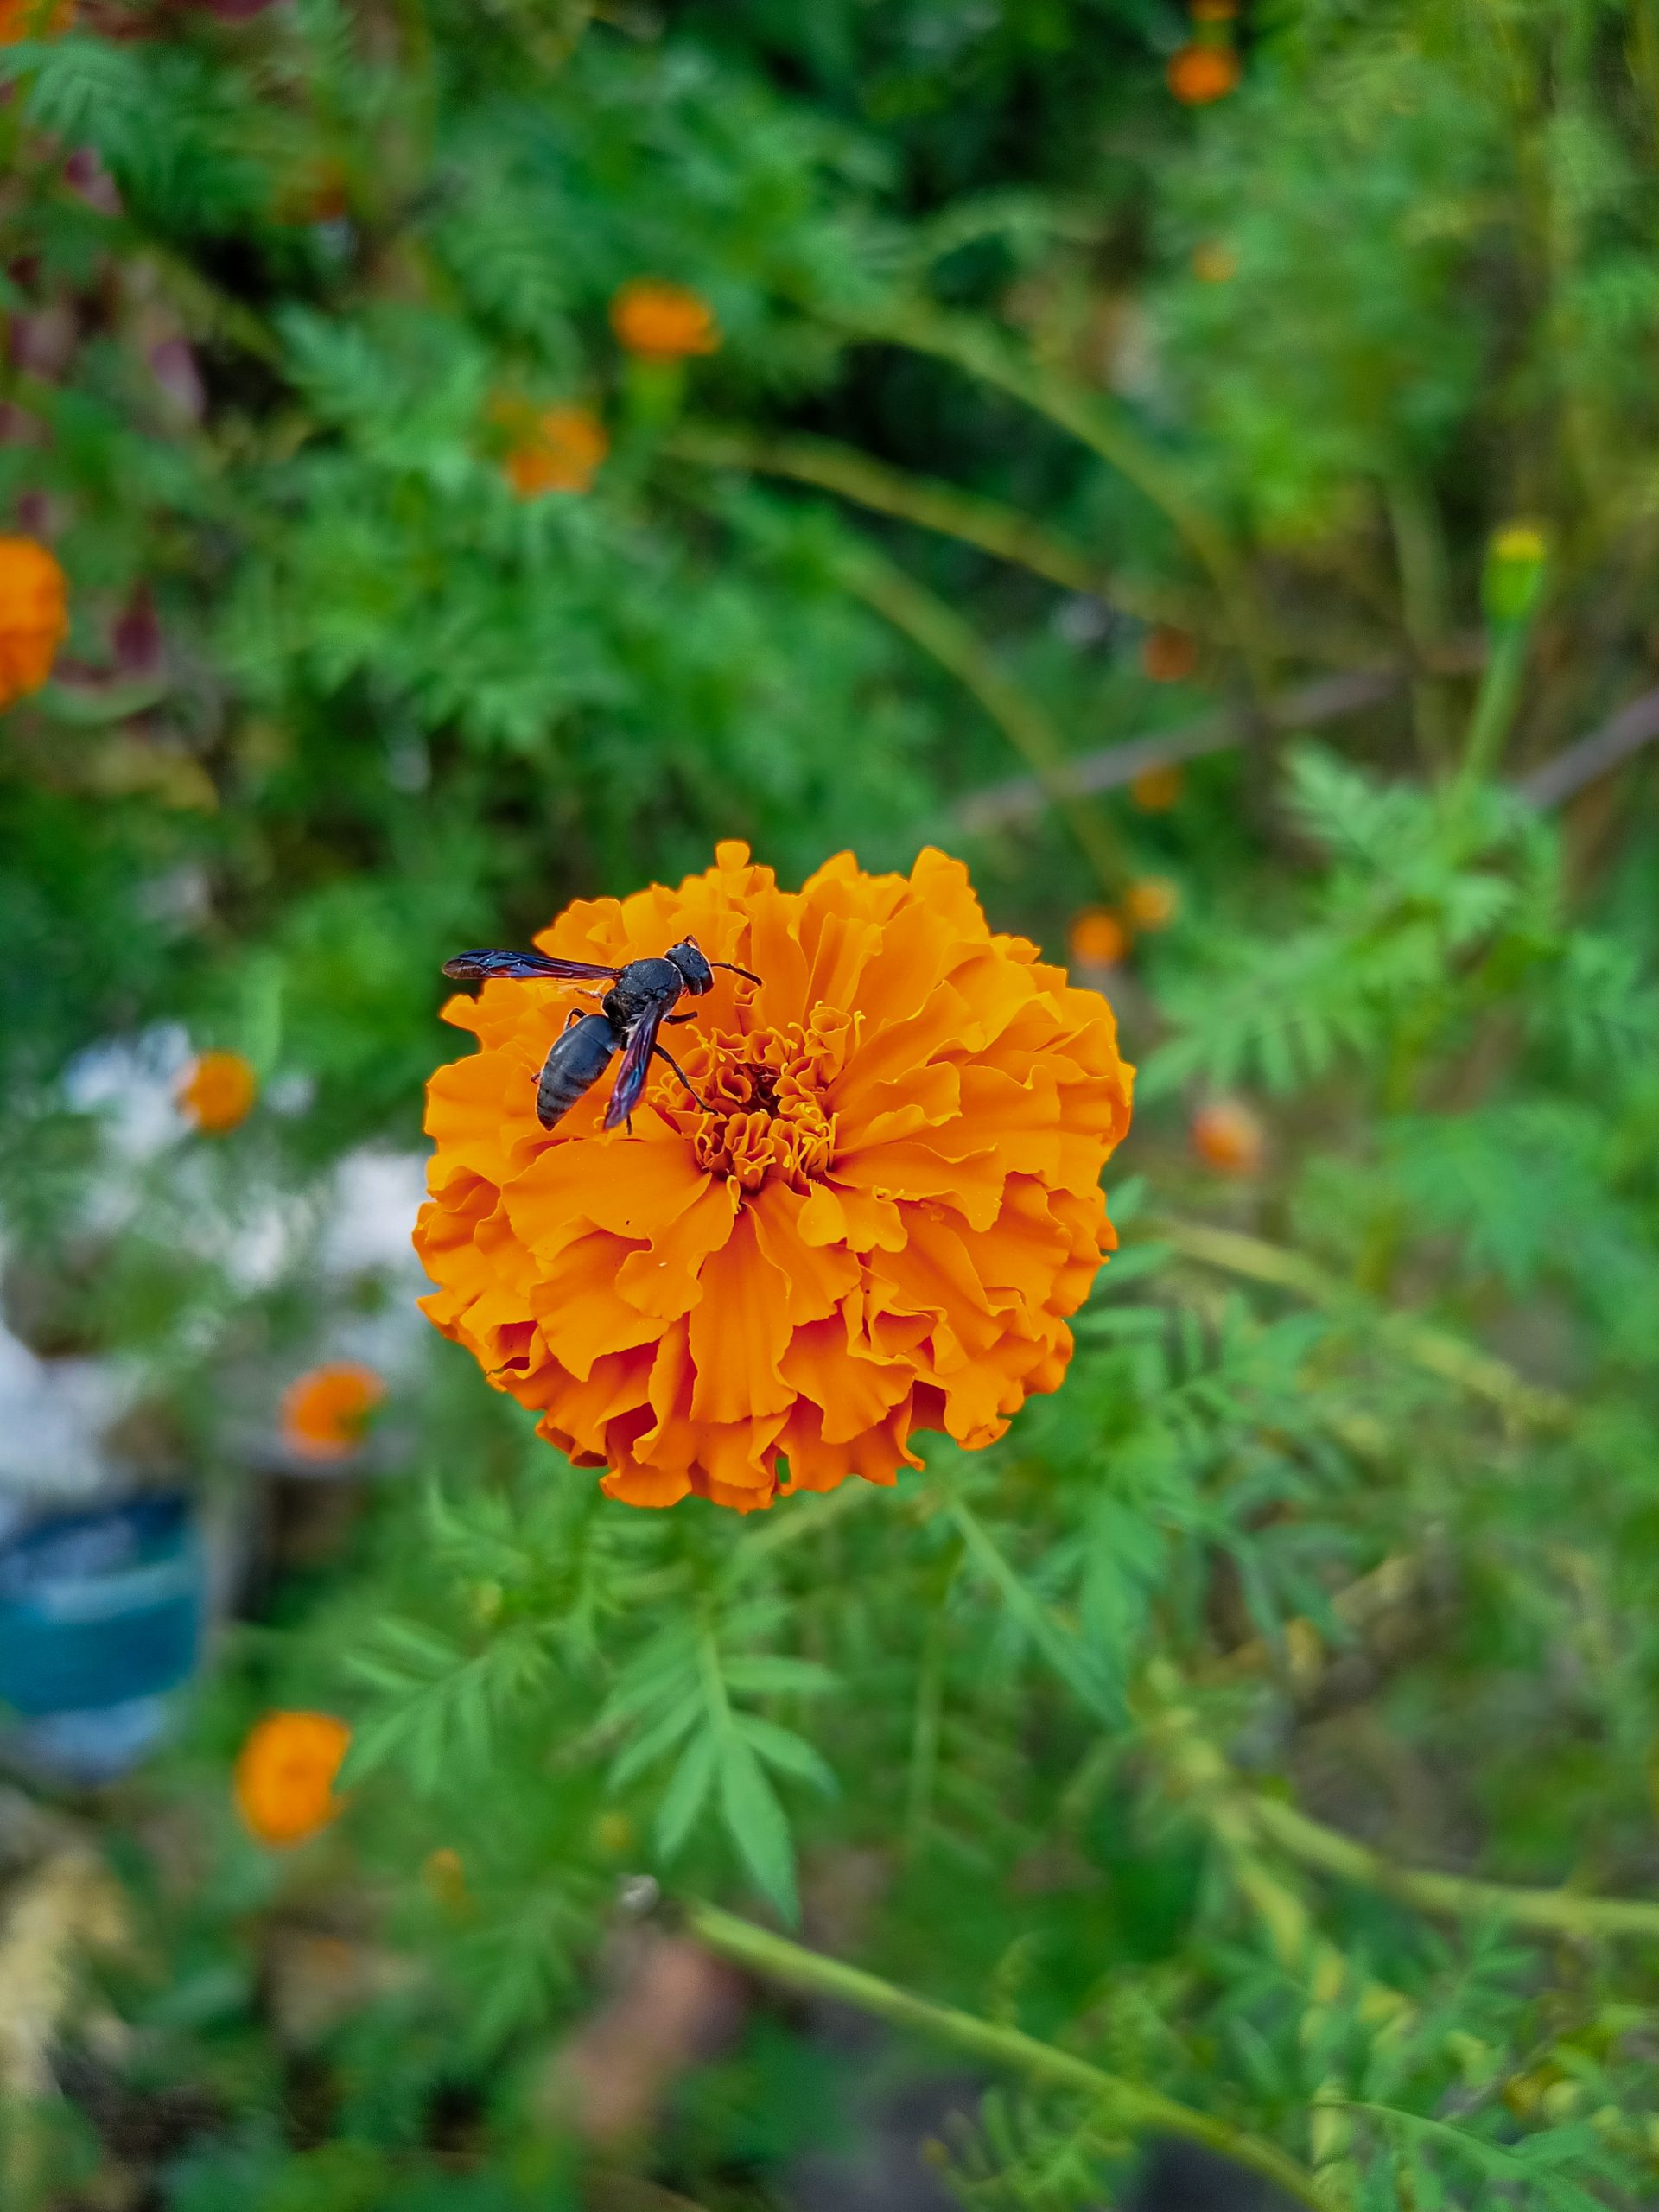 An insect on marigold flower